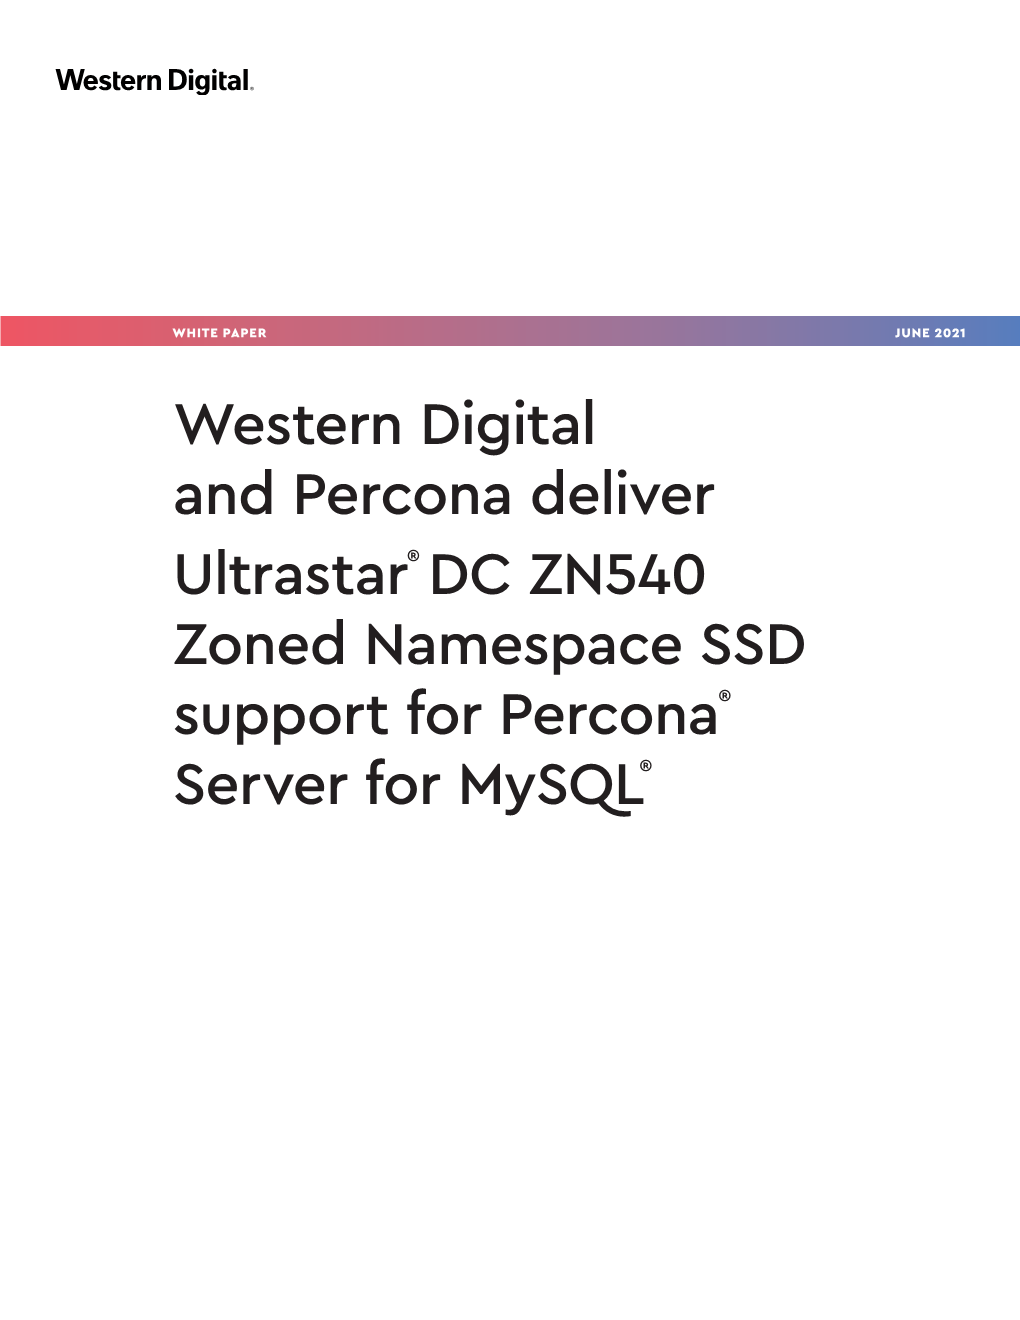 Western Digital and Percona Deliver Ultrastar® DC ZN540 Zoned Namespace SSD Support for Percona® Server for Mysql® WHITE PAPER